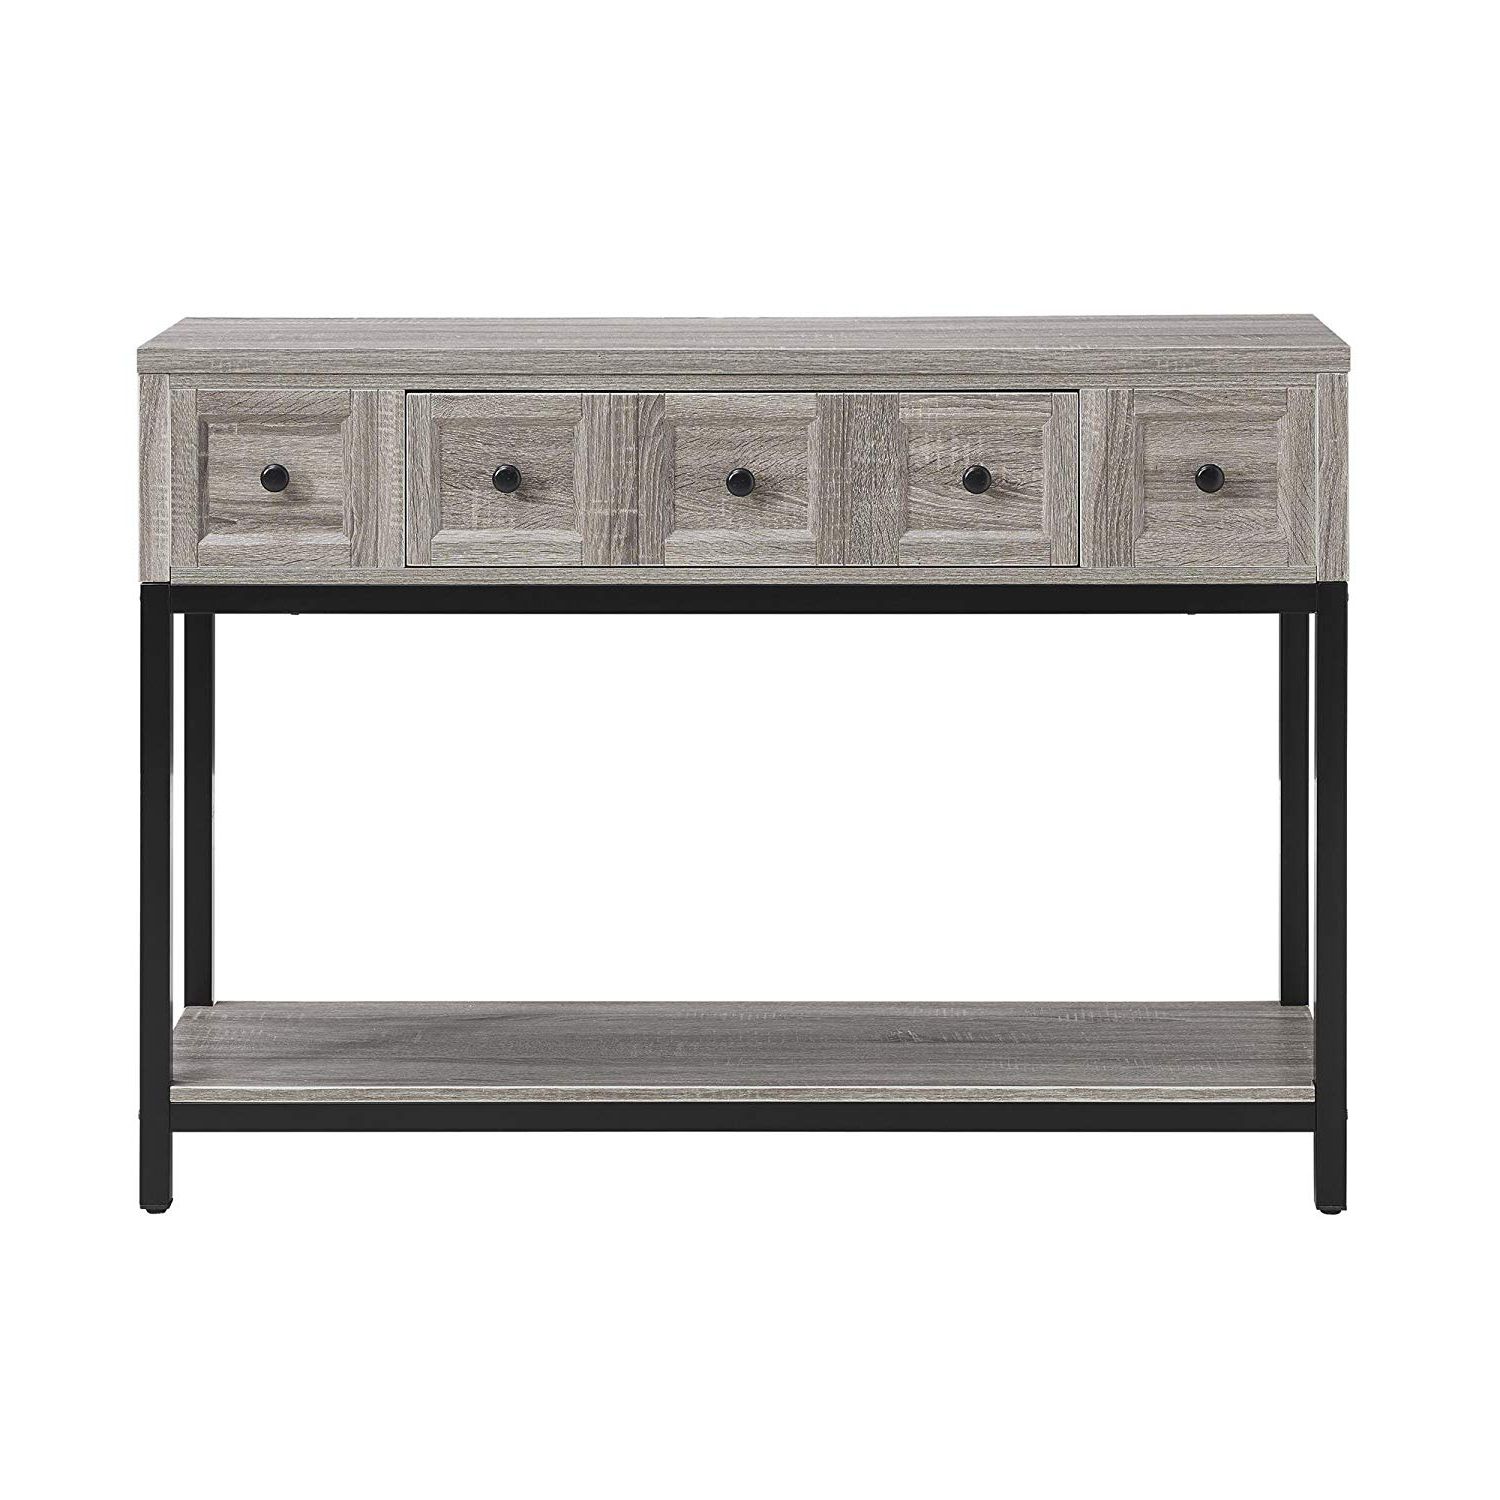 Latest Parsons White Marble Top & Dark Steel Base 48x16 Console Tables In Amazon: Altra Furniture Console Table In Sonoma Oak Finish (Photo 10 of 20)